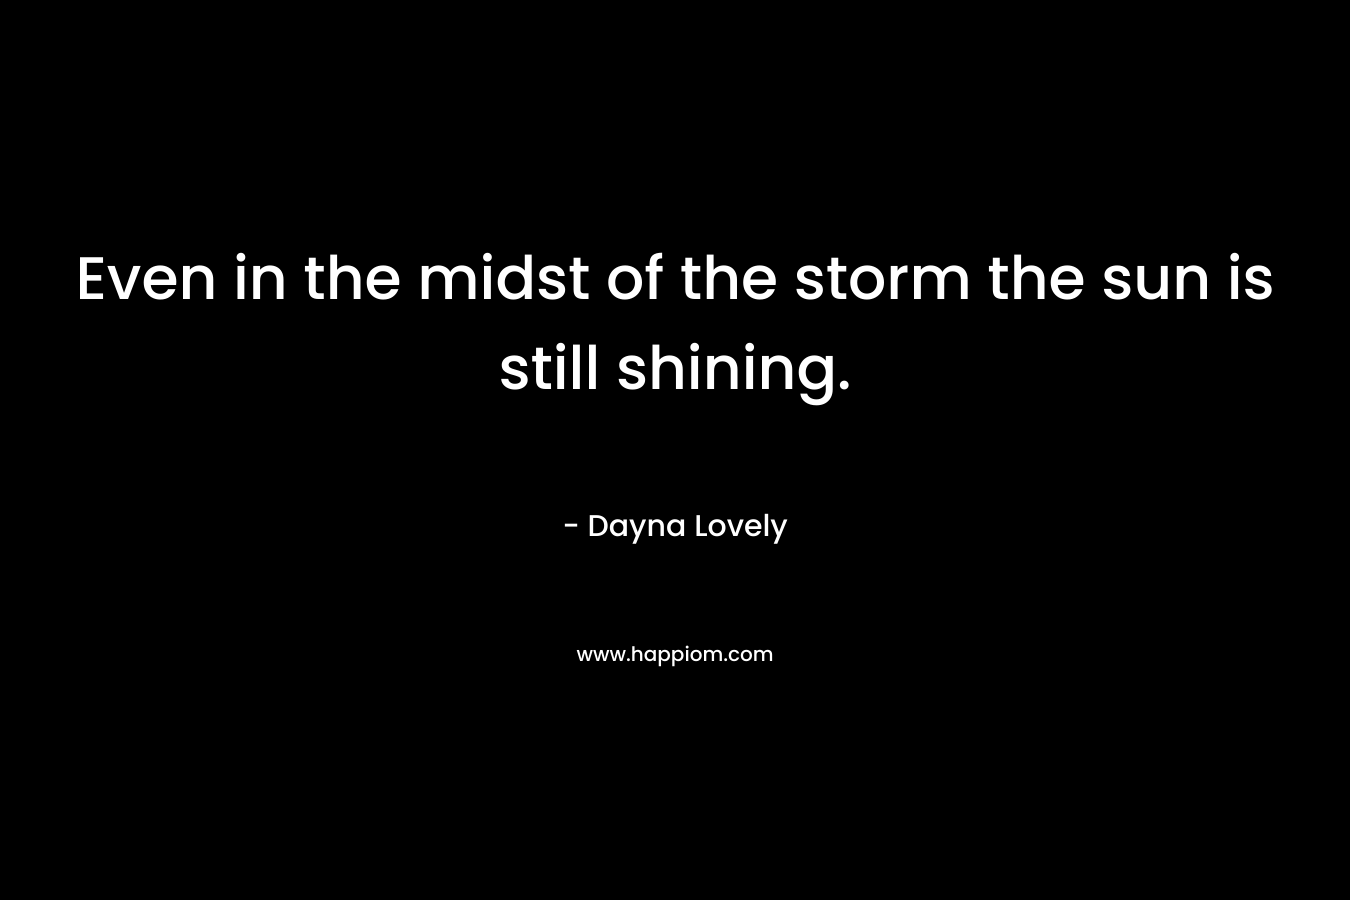 Even in the midst of the storm the sun is still shining. – Dayna Lovely